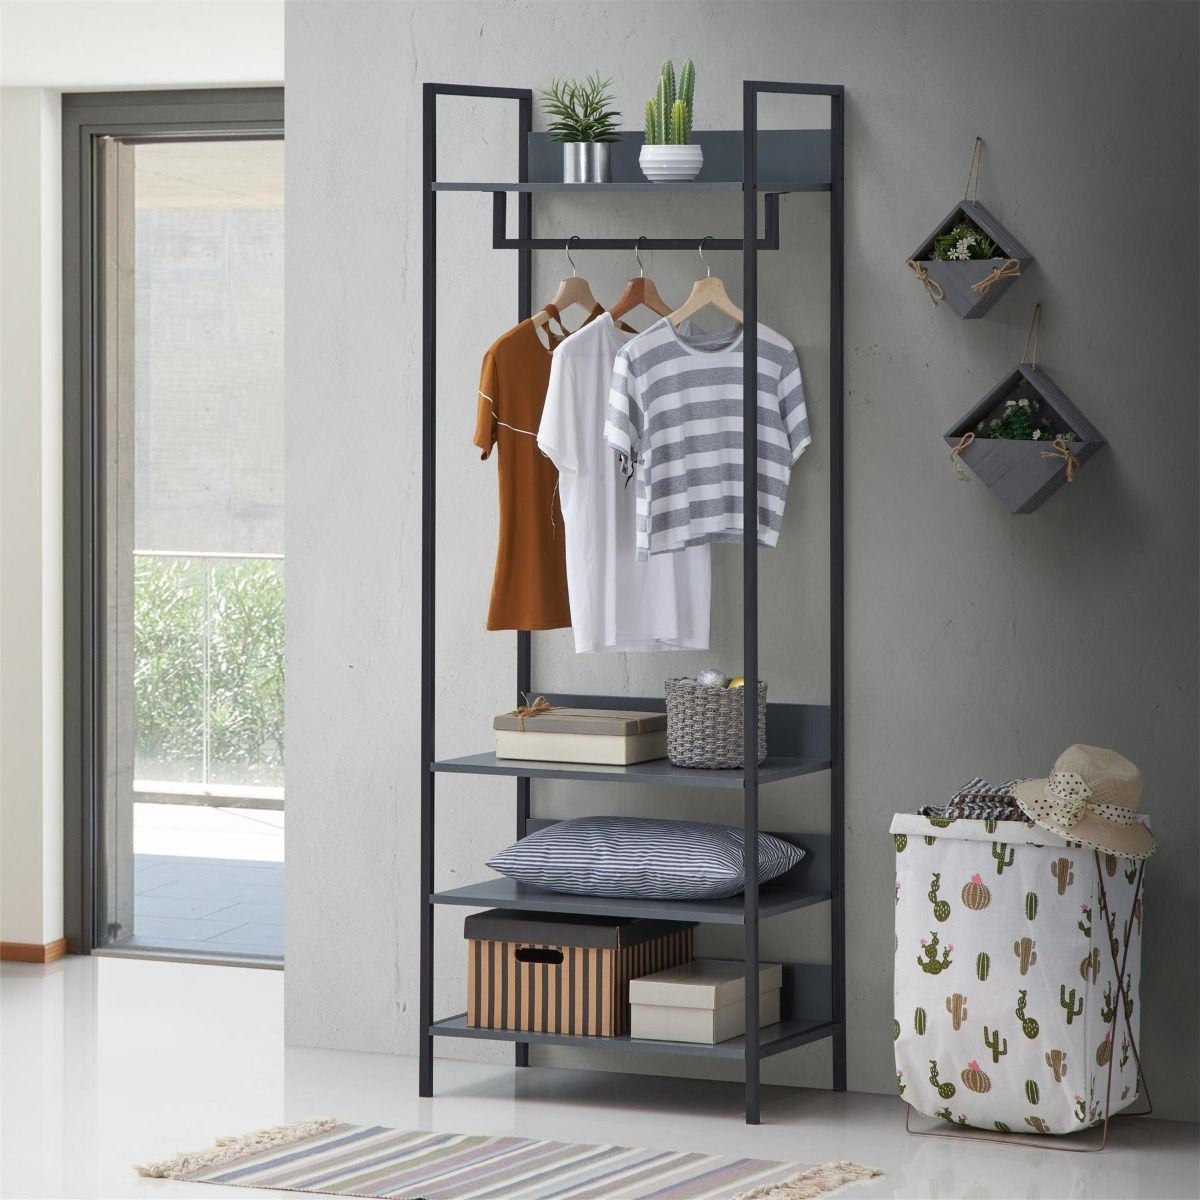 Seville Open Wardrobe Unit with 2 Drawers Clothing Storage Unit Industrial Design